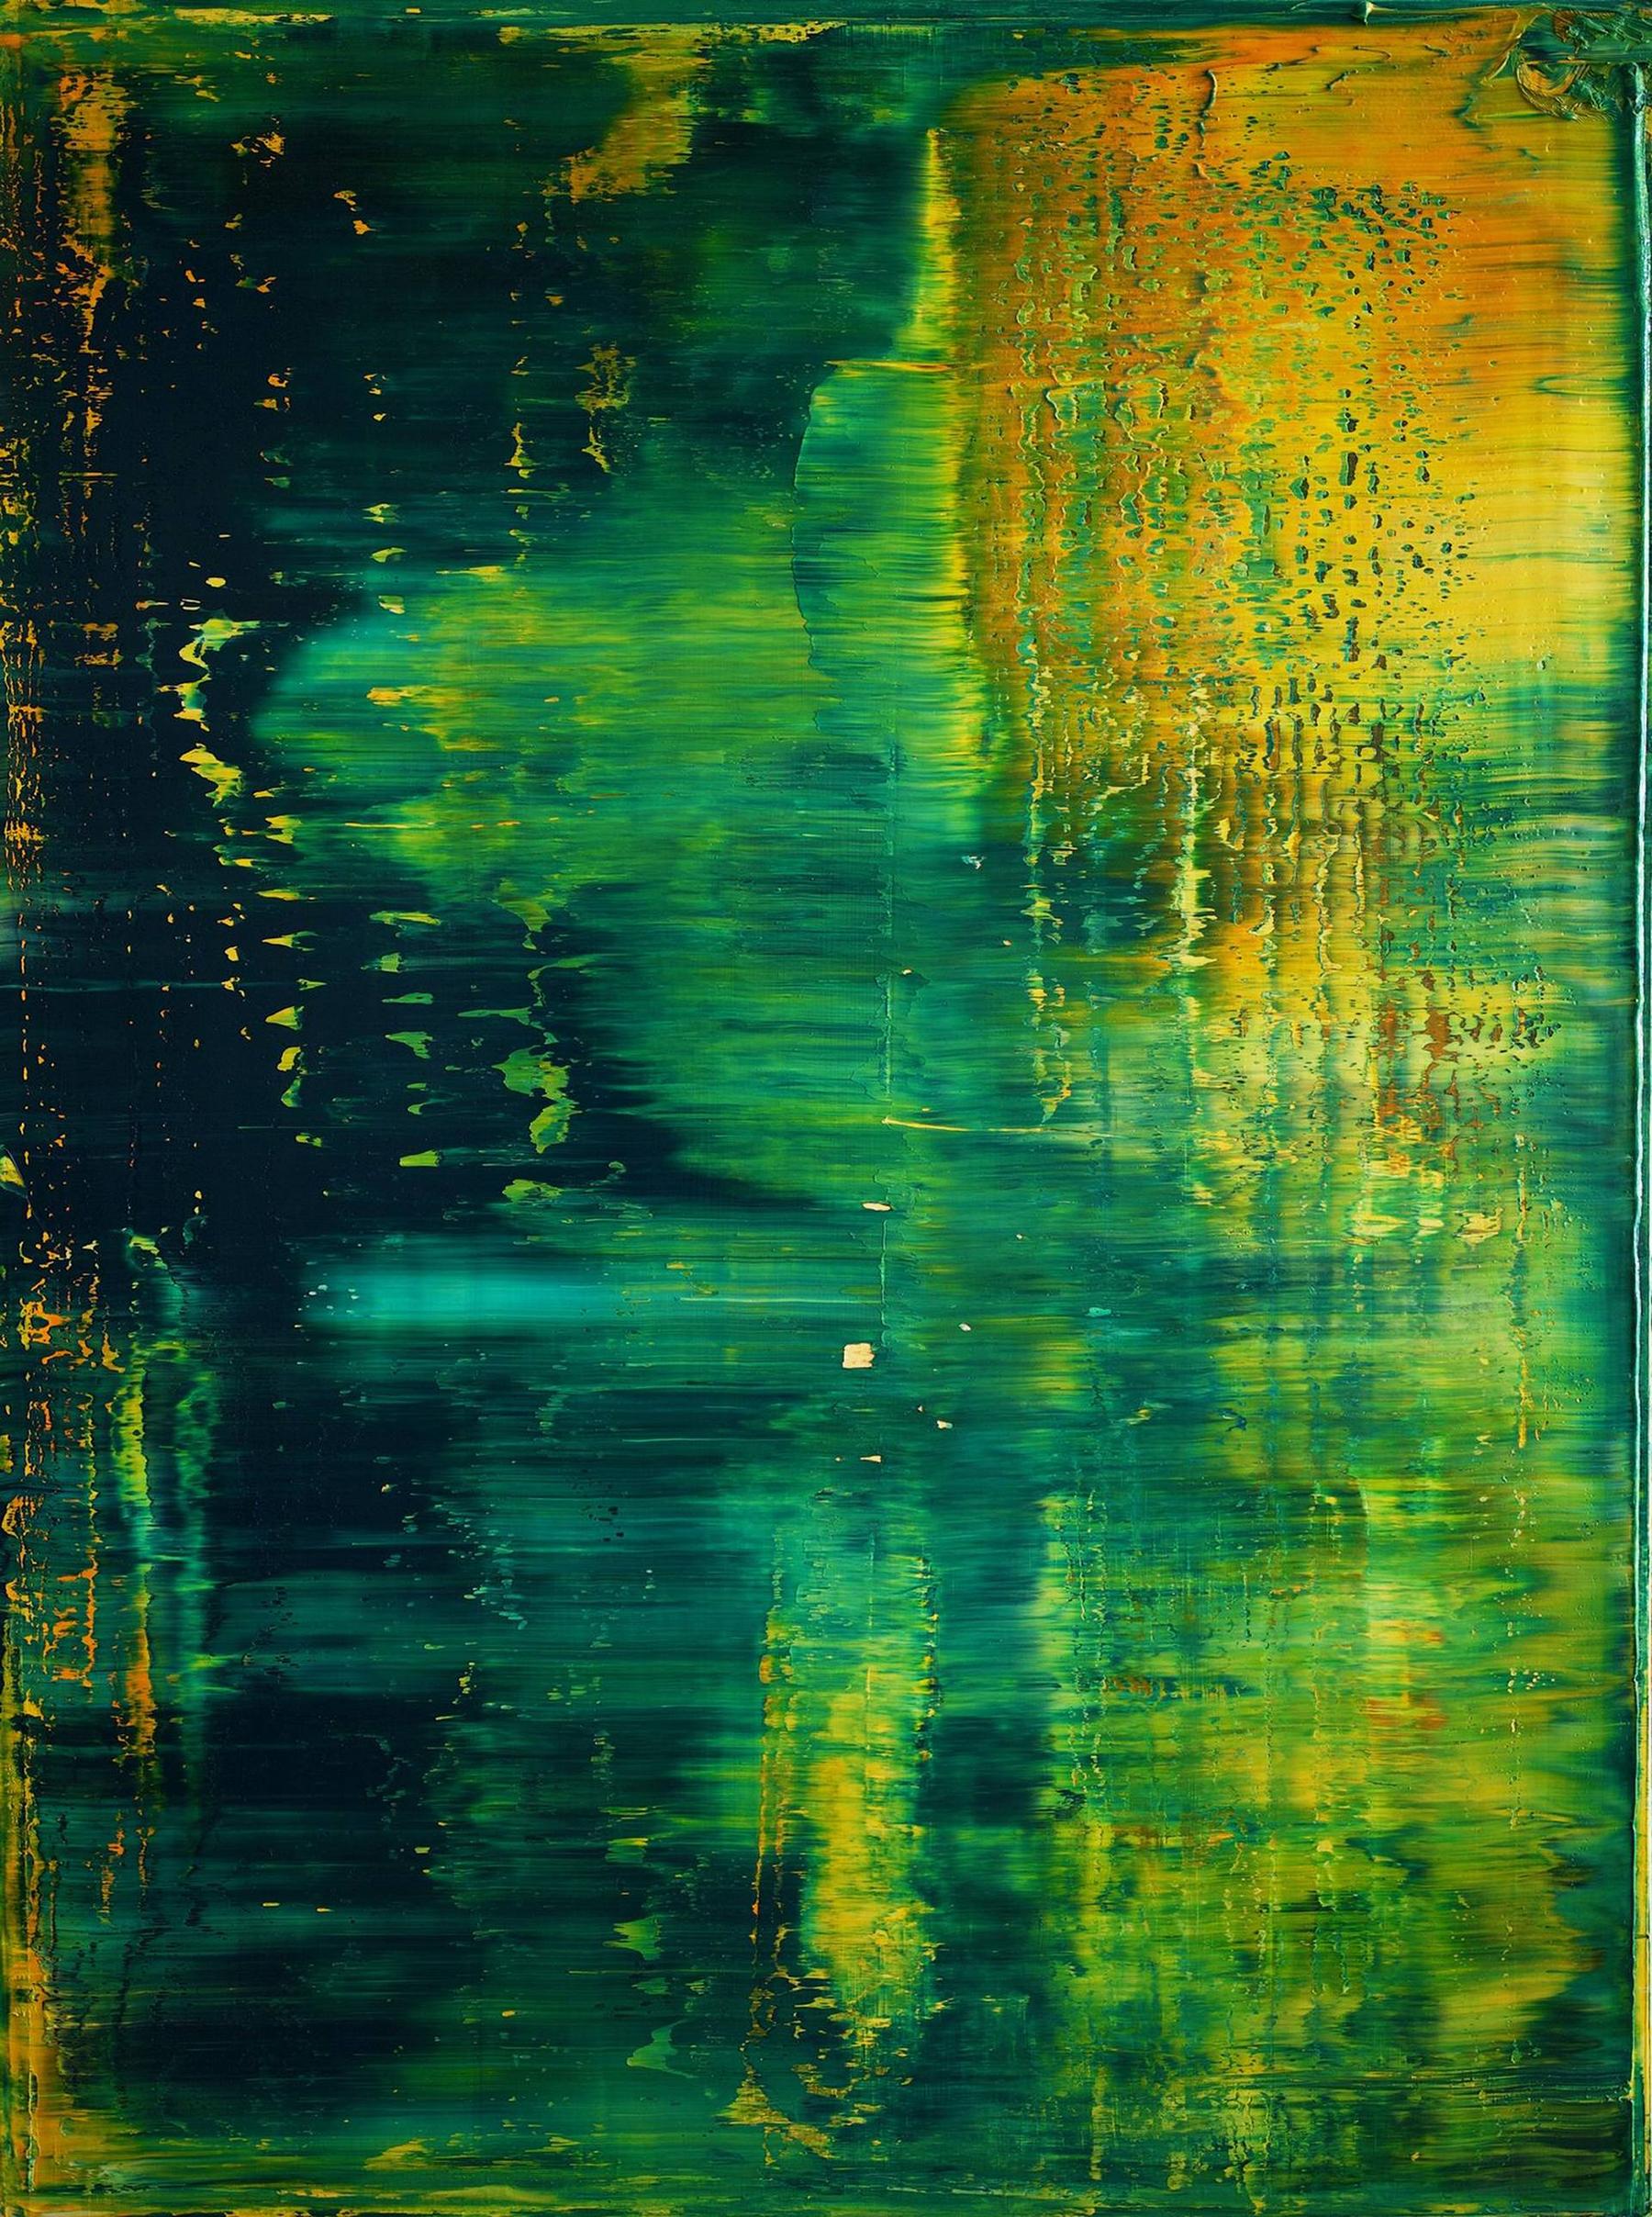 Abstract Painting Harry James Moody - Affiche abstraite vert n° 489